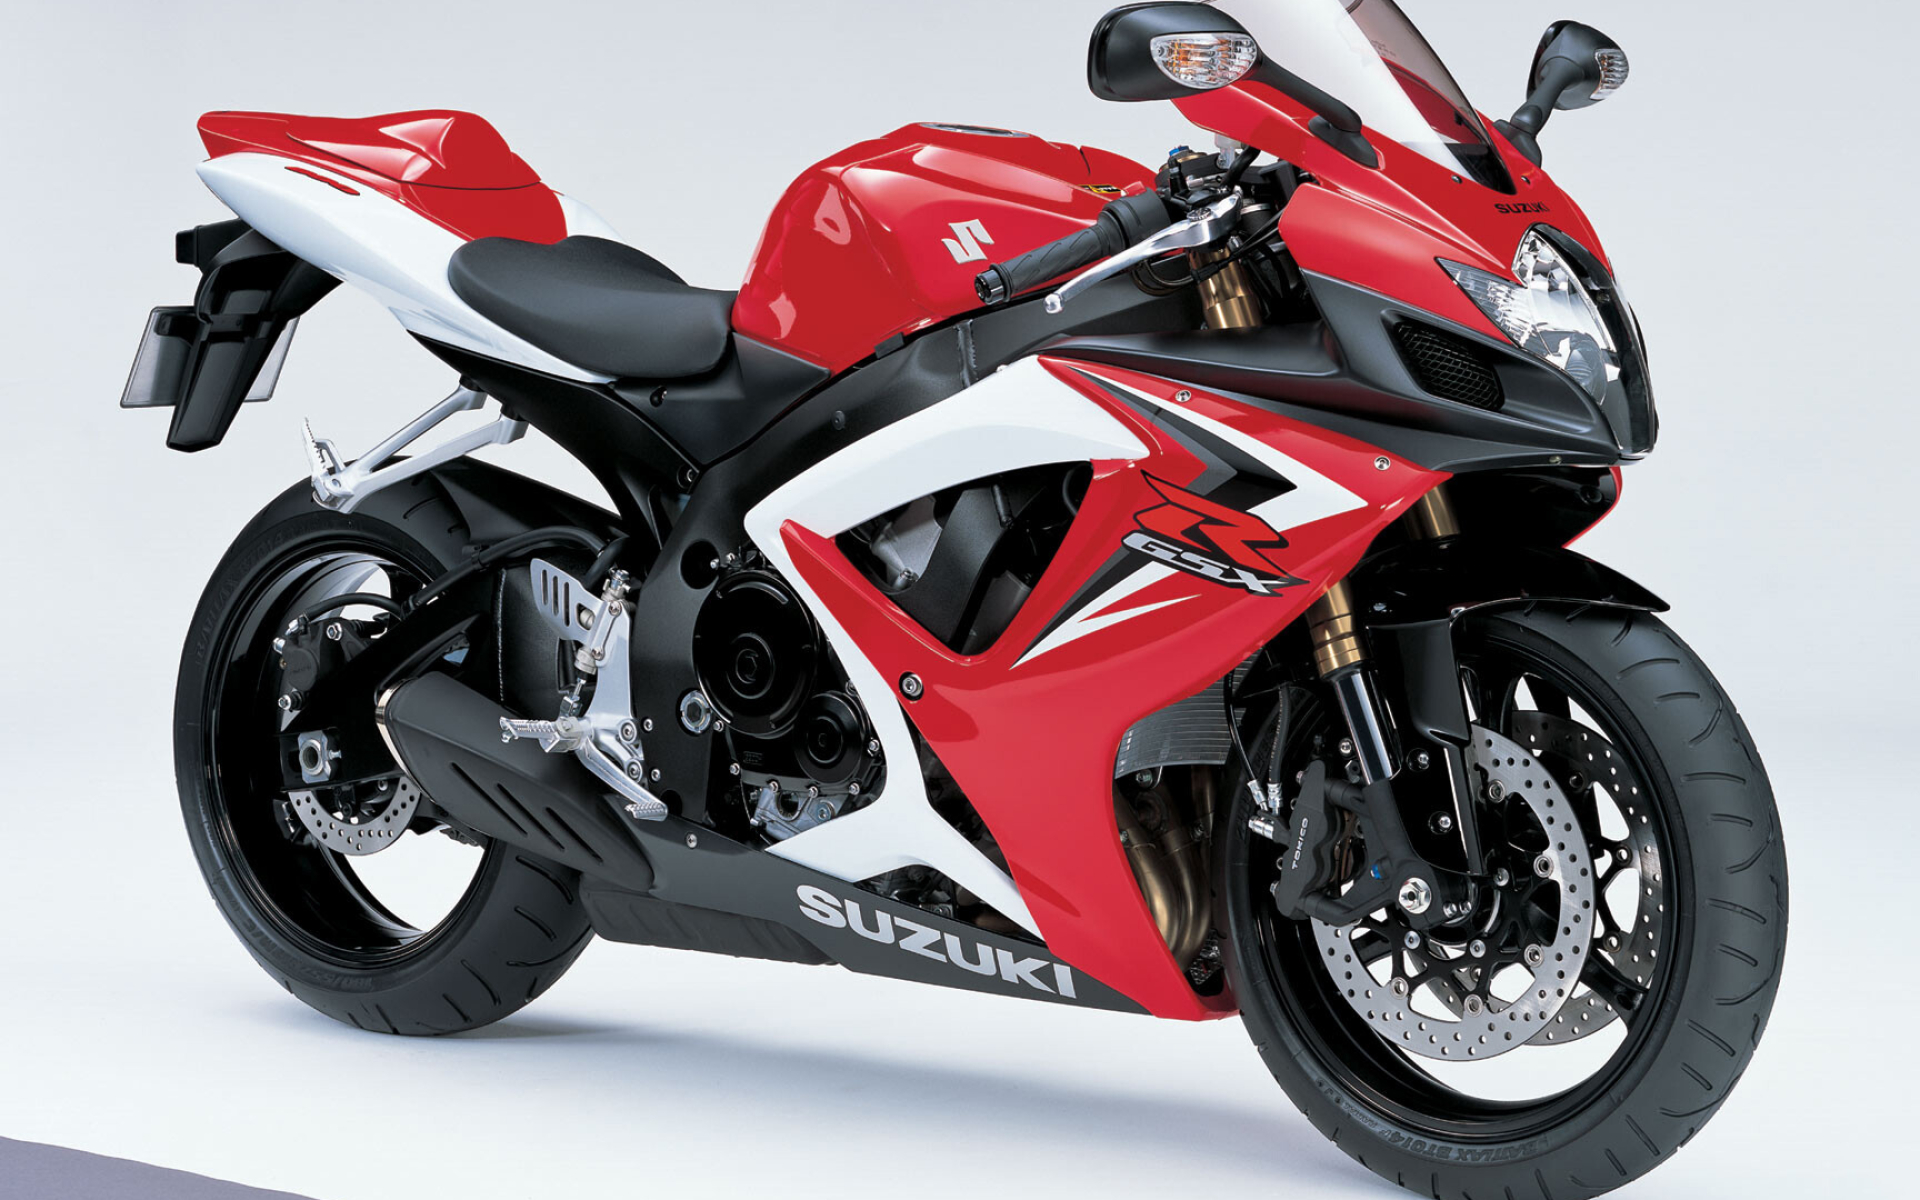 GSX-R: Gixxer 600, The second generation of Suzuki's motorcycles was released in 1988. 1920x1200 HD Background.